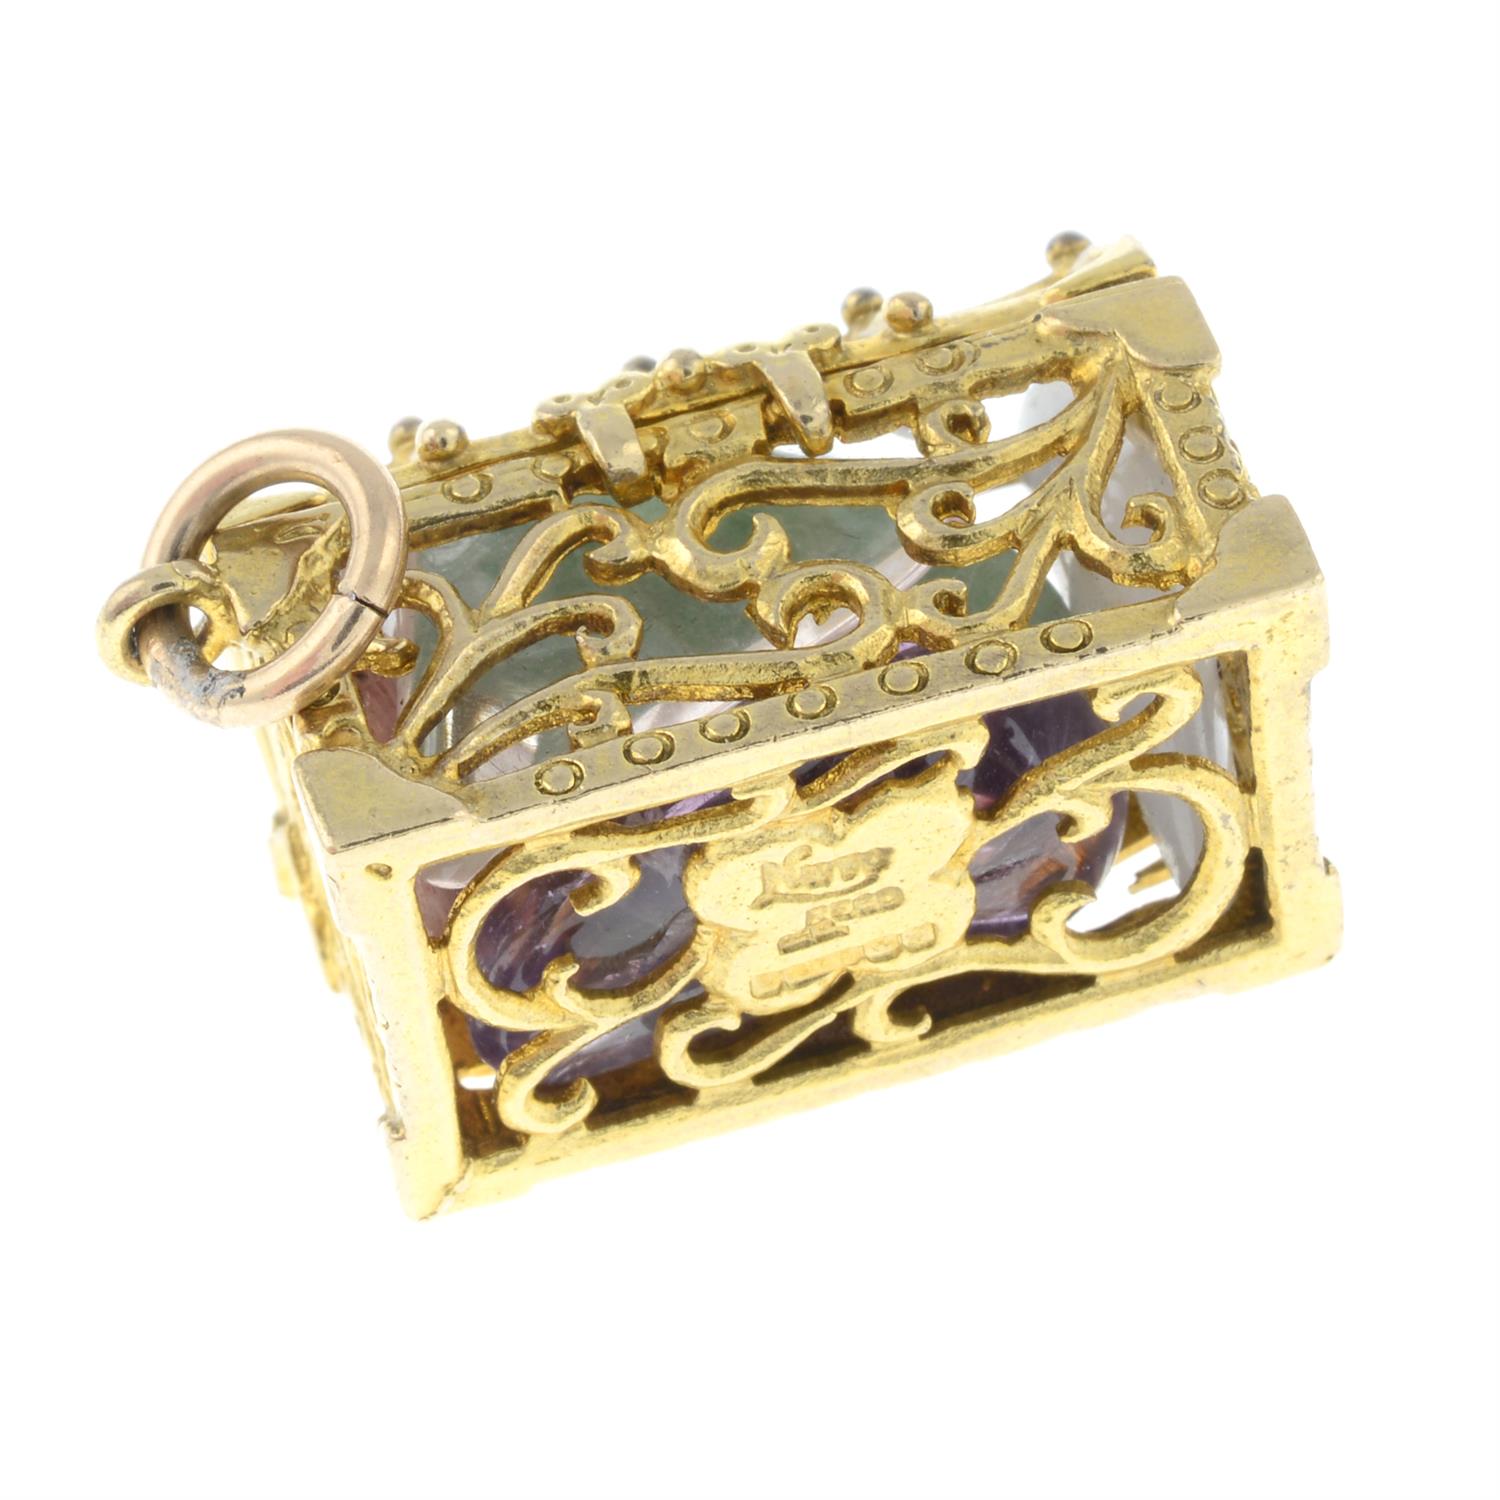 A 9ct gold tumbled gemstone treasure chest charm - Image 2 of 2